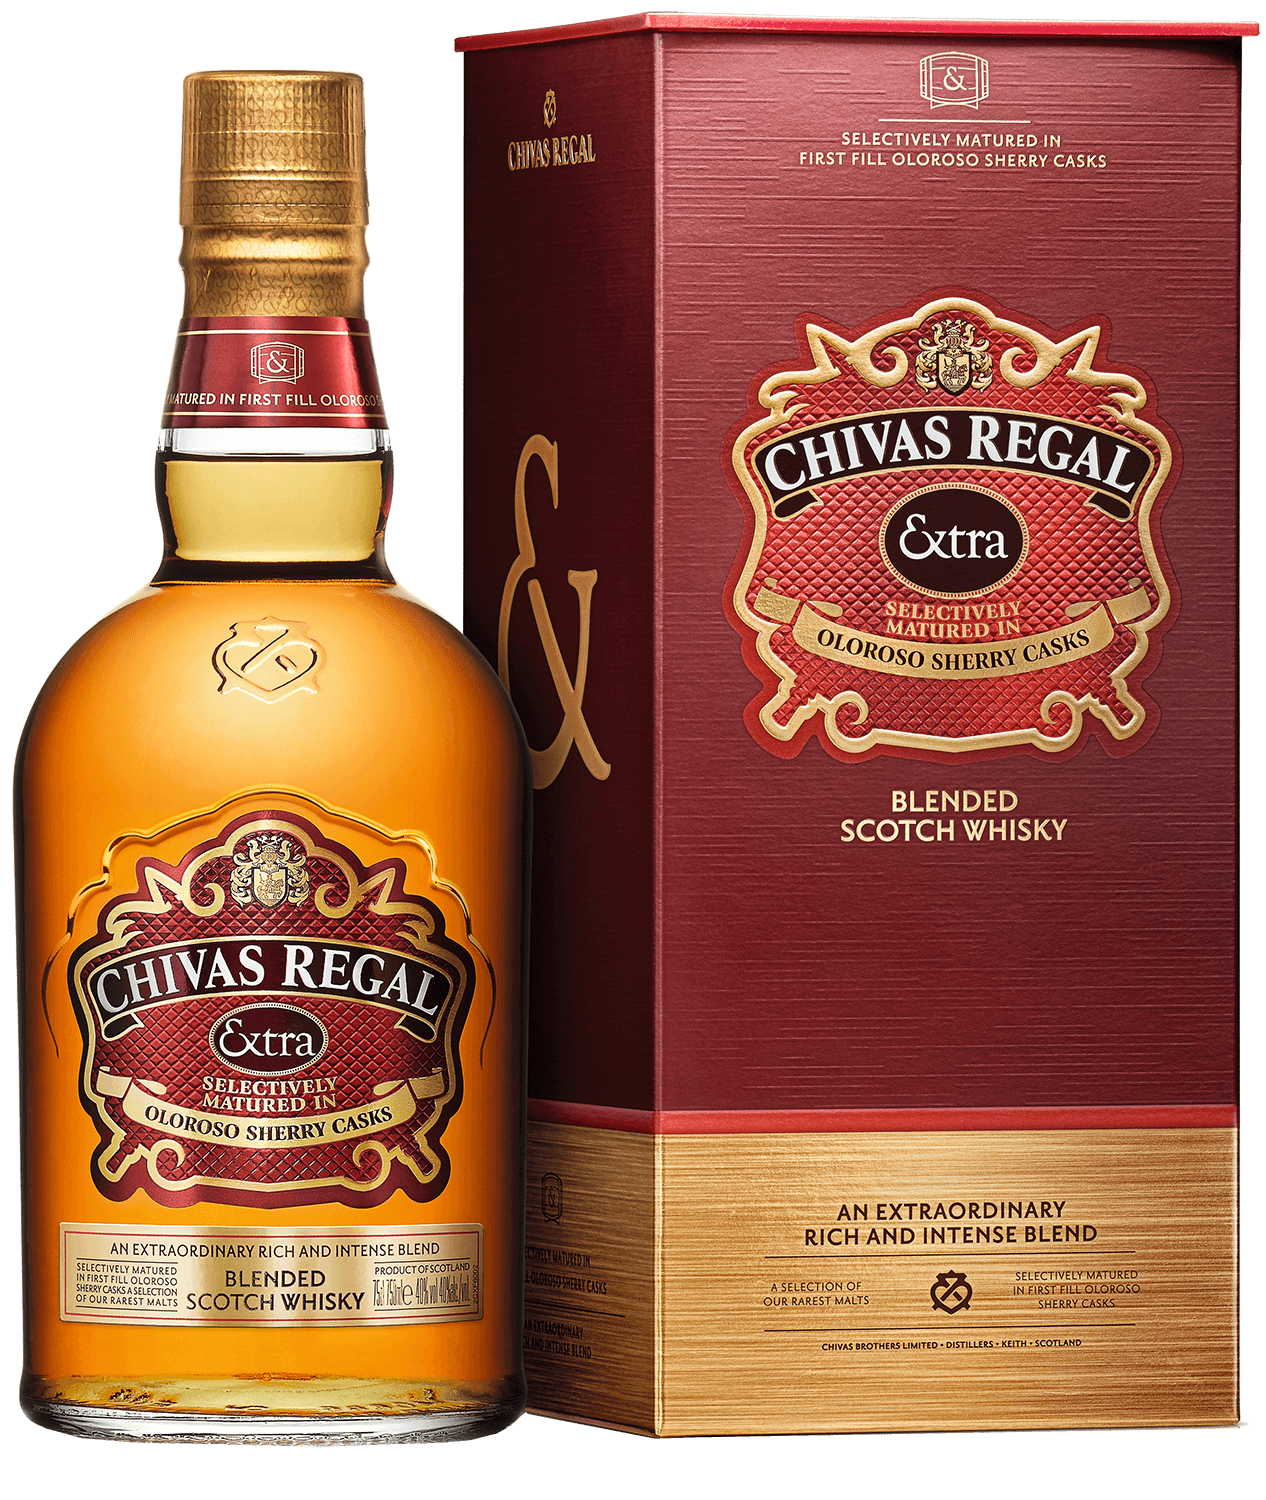 Chivas Regal Extra Blended Scotch Whisky (gift box) chivas regal extra oloroso sherry cask blended scotch whisky 13 y o gift box